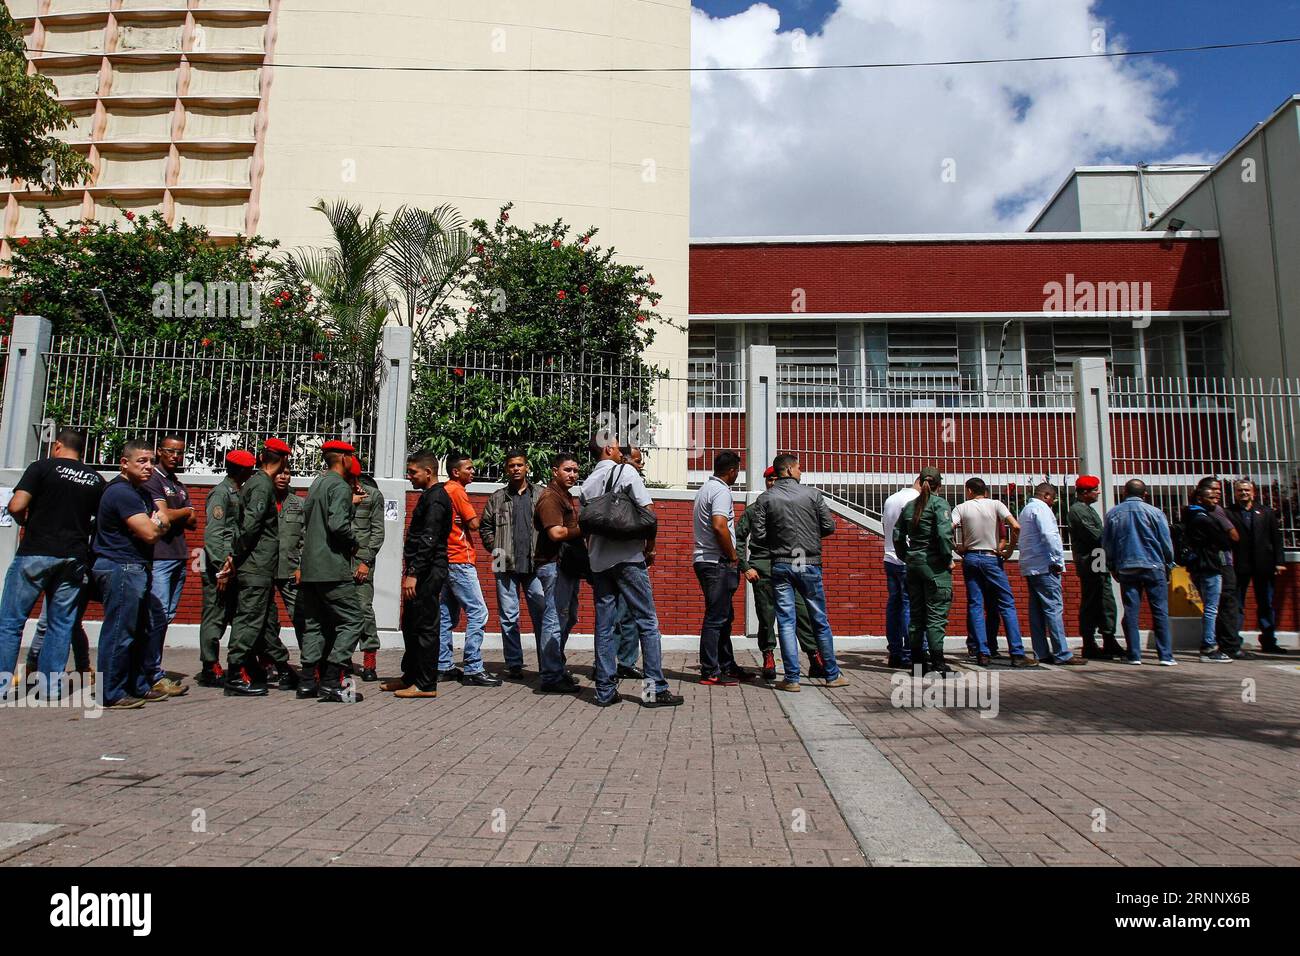 (170731) -- CARACAS, July 31, 2017 -- Residents and members of the military wait to vote for the elections of the National Constituent Assembly (ANC) at a polling station in Caracas, Venezuela, on July 30, 2017. Venezuela s Vice President Tareck El Aissami said on Sunday that voting was proceeding smoothly, except for an isolated incident in Tachira state that authorities brought under control. Boris Vergara) (ma) (fnc) (yk) VENEZUELA-CARACAS-ANC-ELECTIONS e BorisxVergara PUBLICATIONxNOTxINxCHN   Caracas July 31 2017 Residents and Members of The Military Wait to VOTE for The Elections of The N Stock Photo